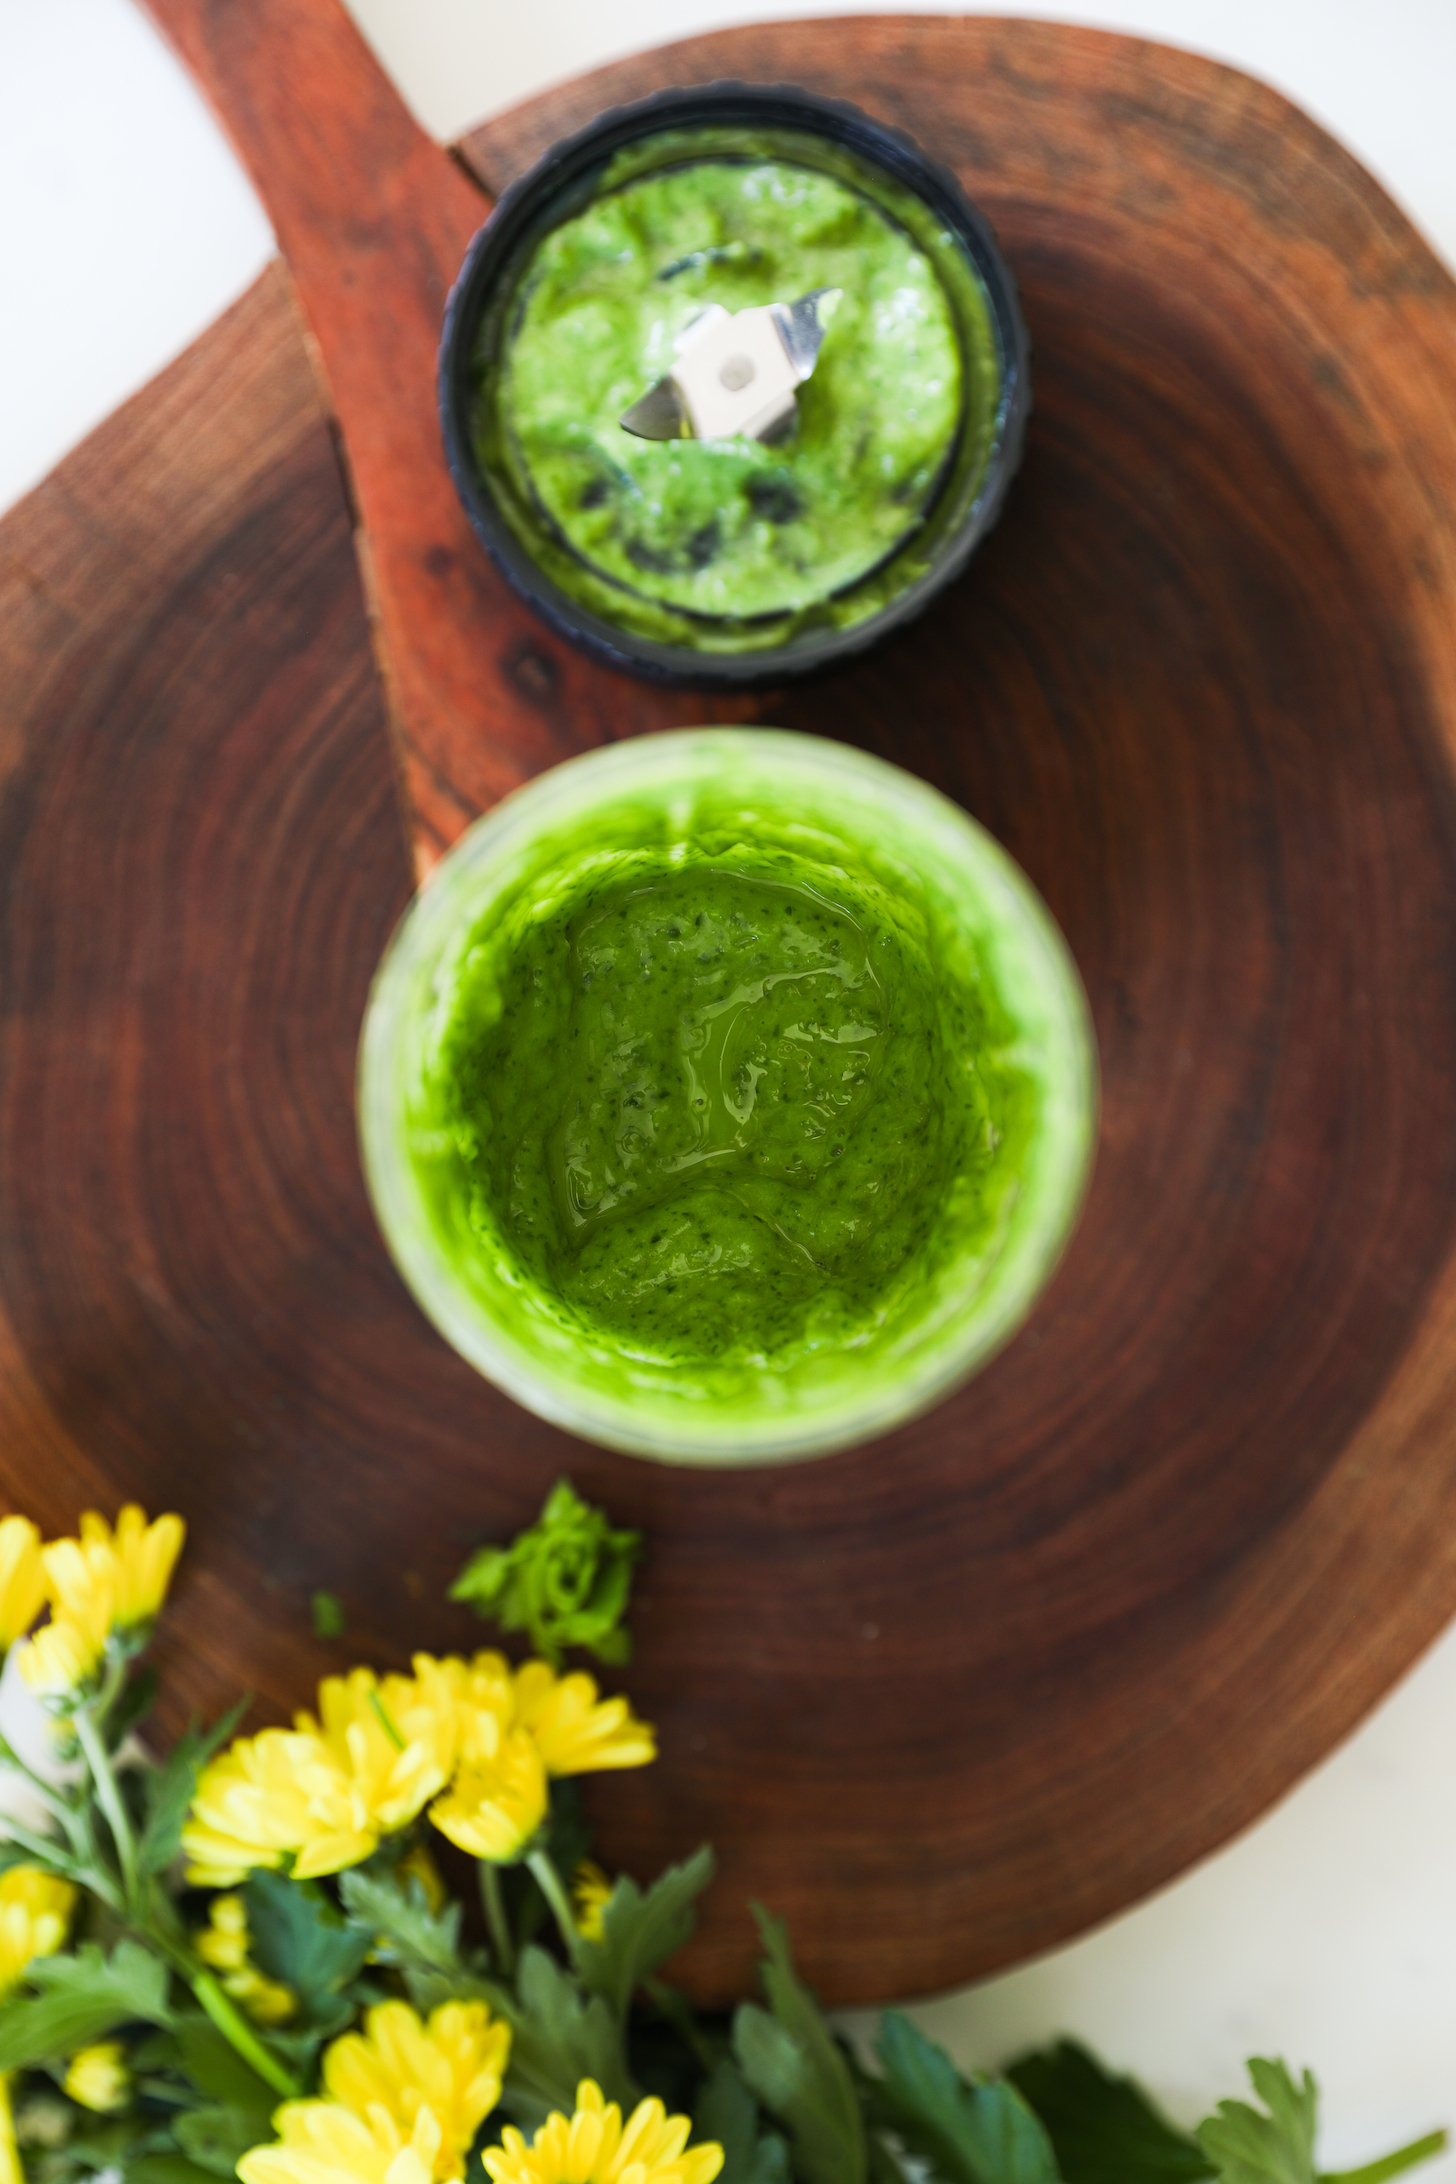 Top view of a small blender filled with an green dressing.